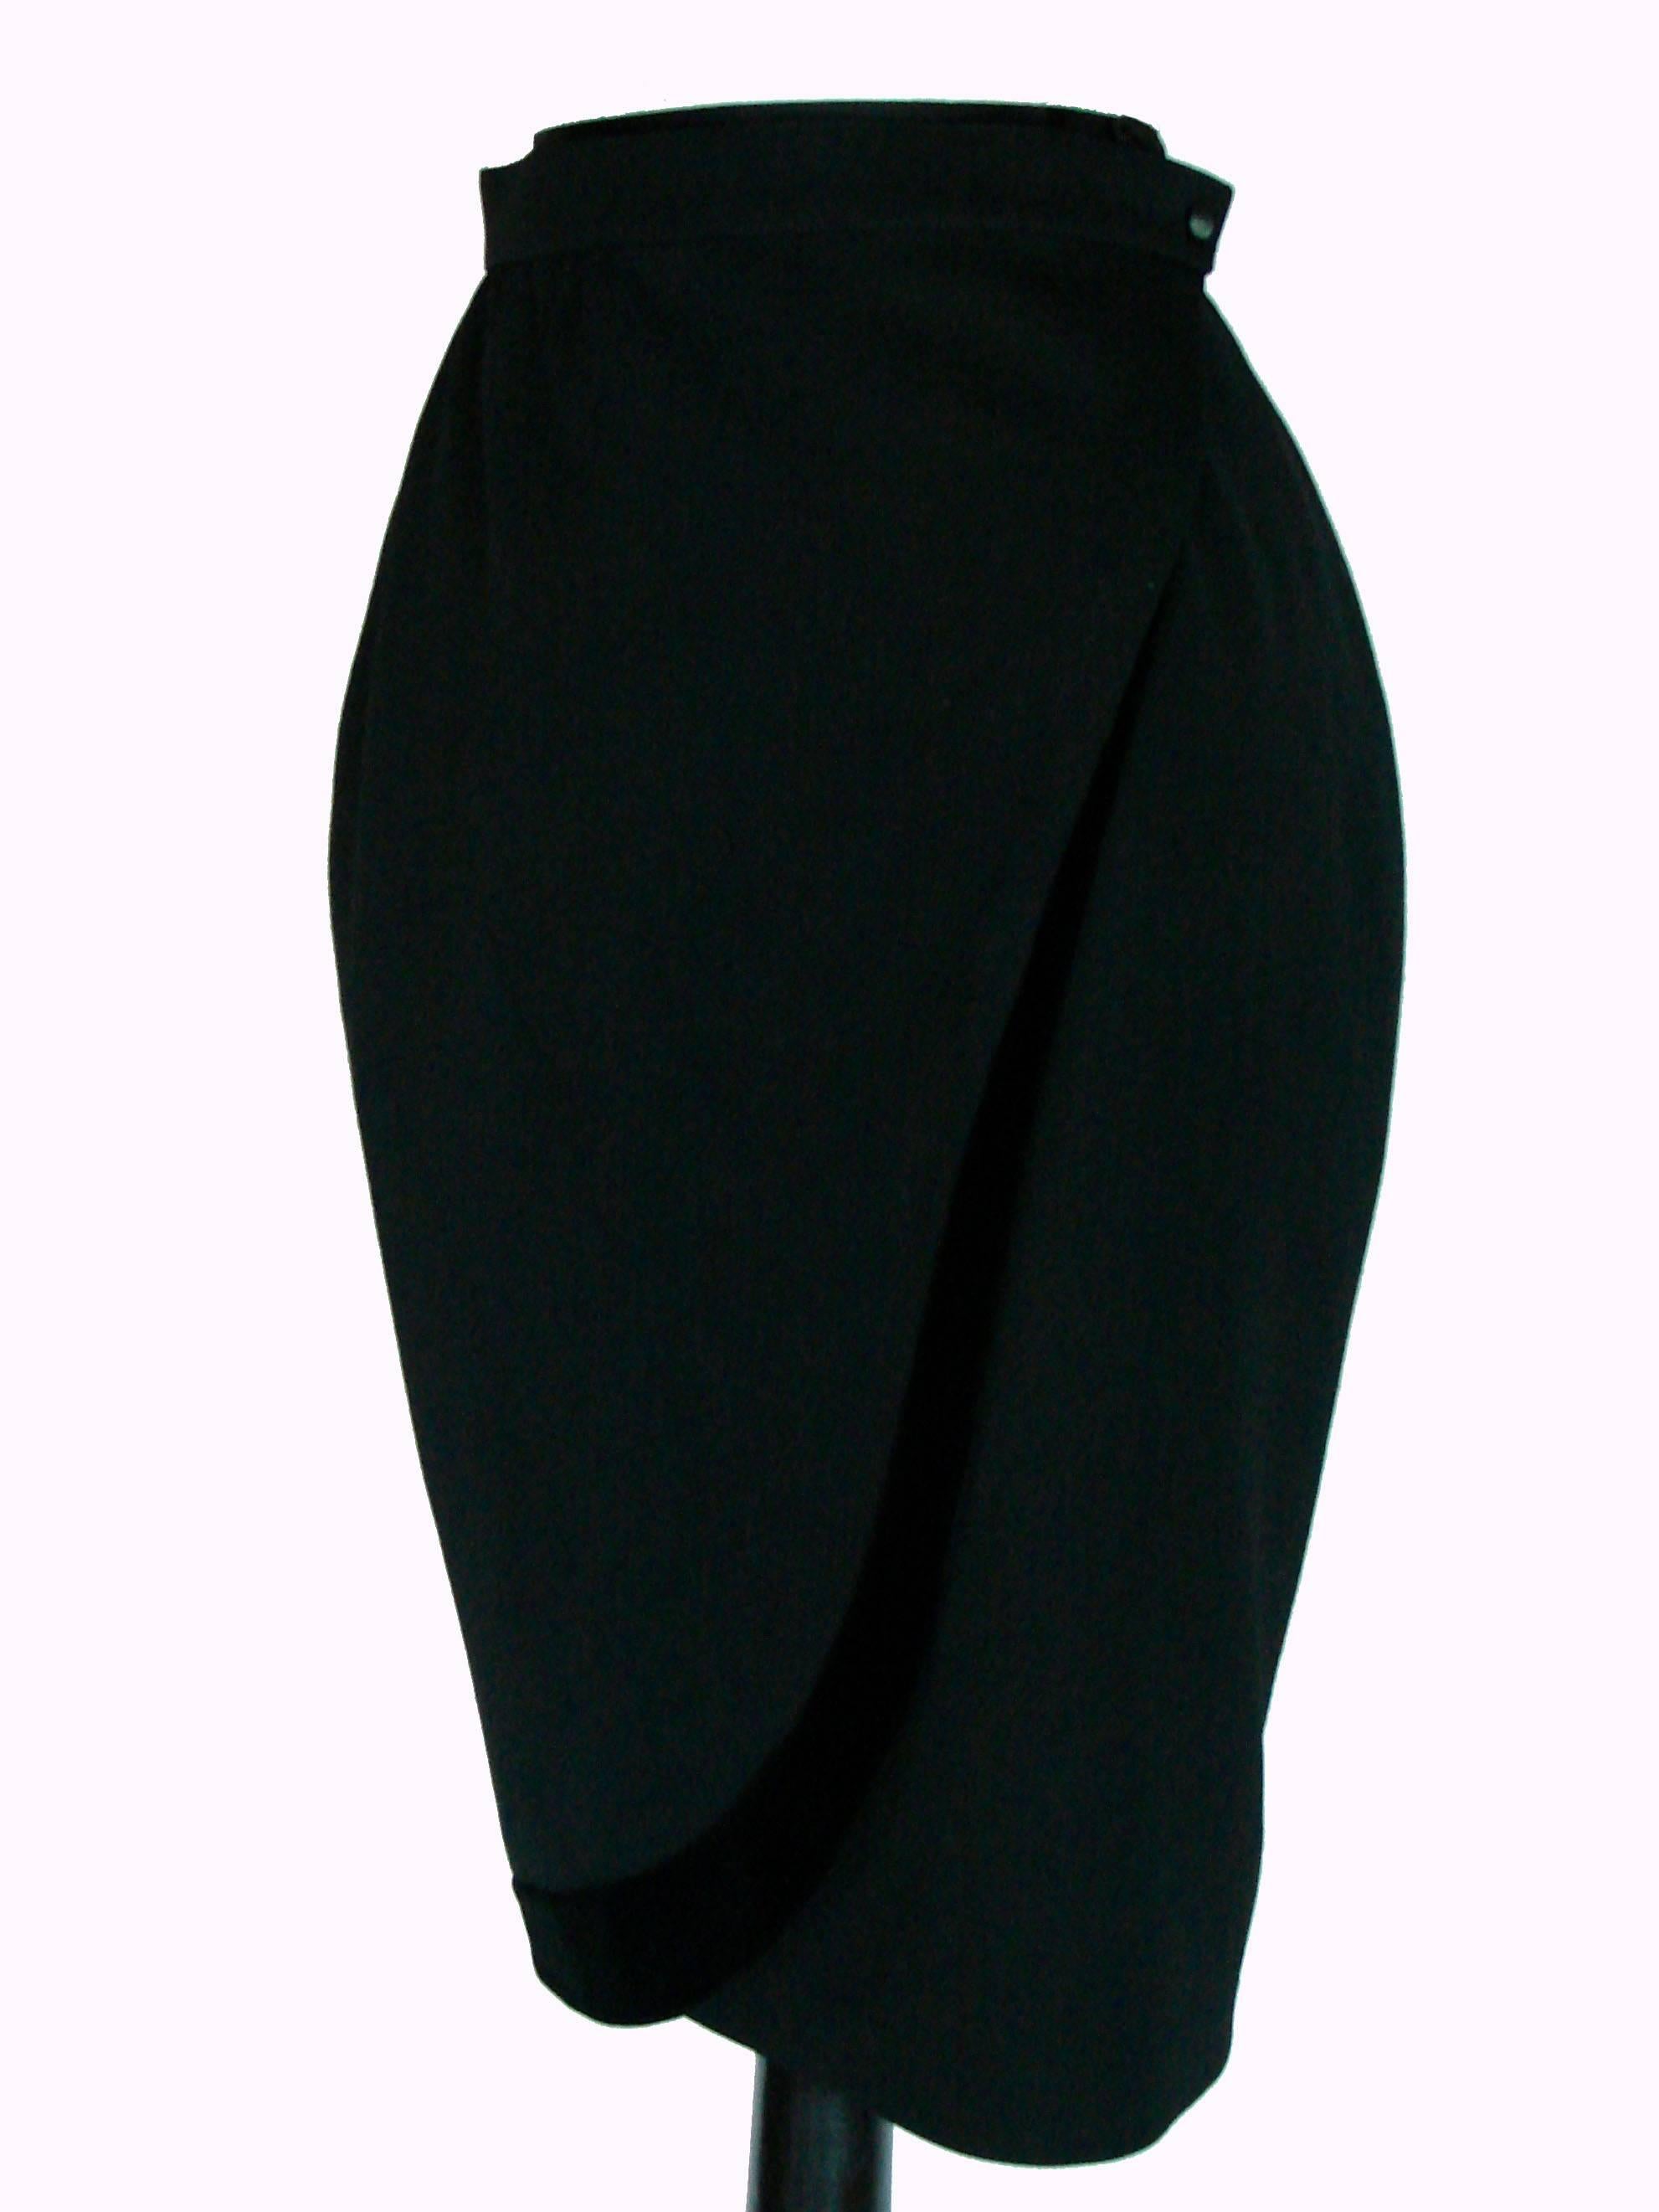 Chic black wool wrap skirt from Thierry Mugler features velvet trim and is fully lined.  This piece is new old stock, never worn and in excellent condition.  Tagged size 36, it measures taken flat and doubled where appropriate: waist - 24